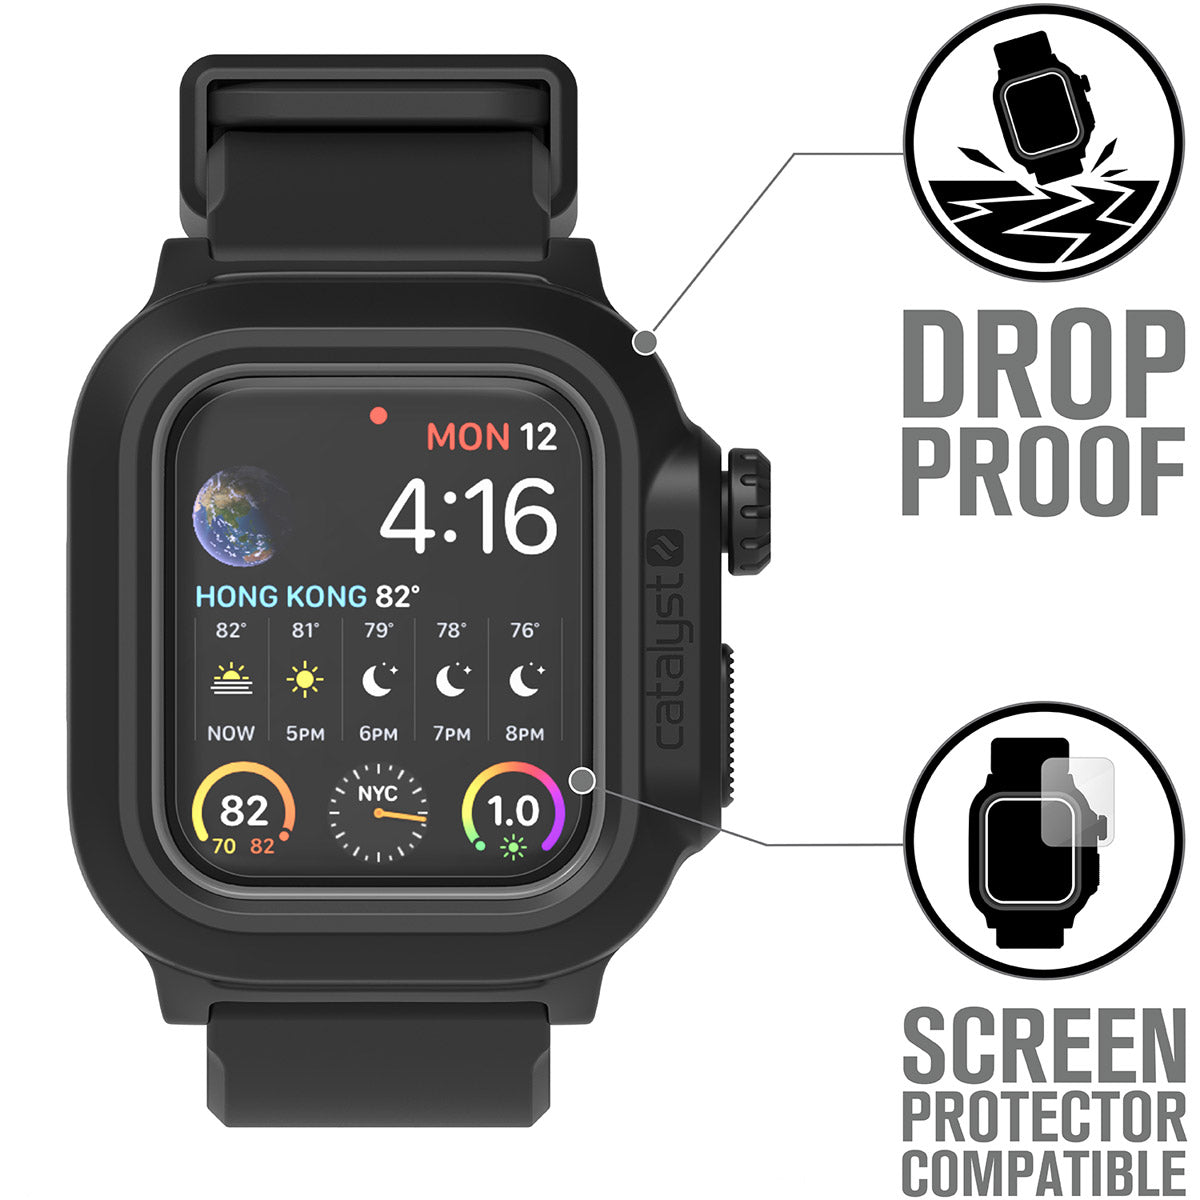 catalyst apple watch series 6 5 4 se gen 2 1 40mm 44mm waterproof case band stealth black  showing the screen protector compatibility text reads drop proof screen protector compatible